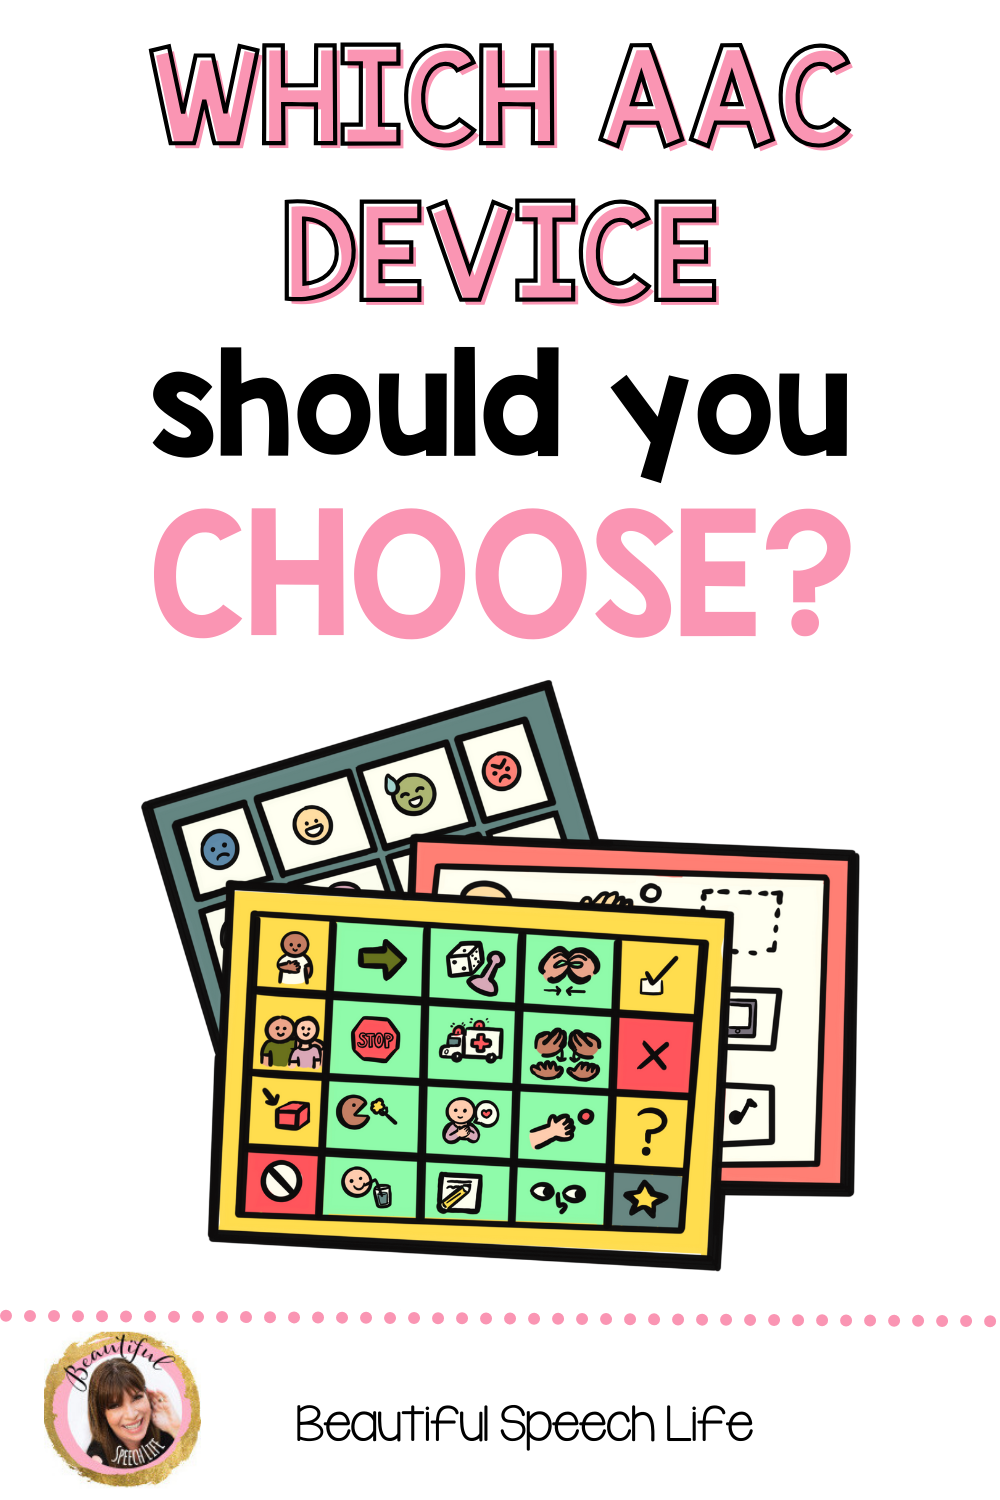 Which AAC Device should you use?